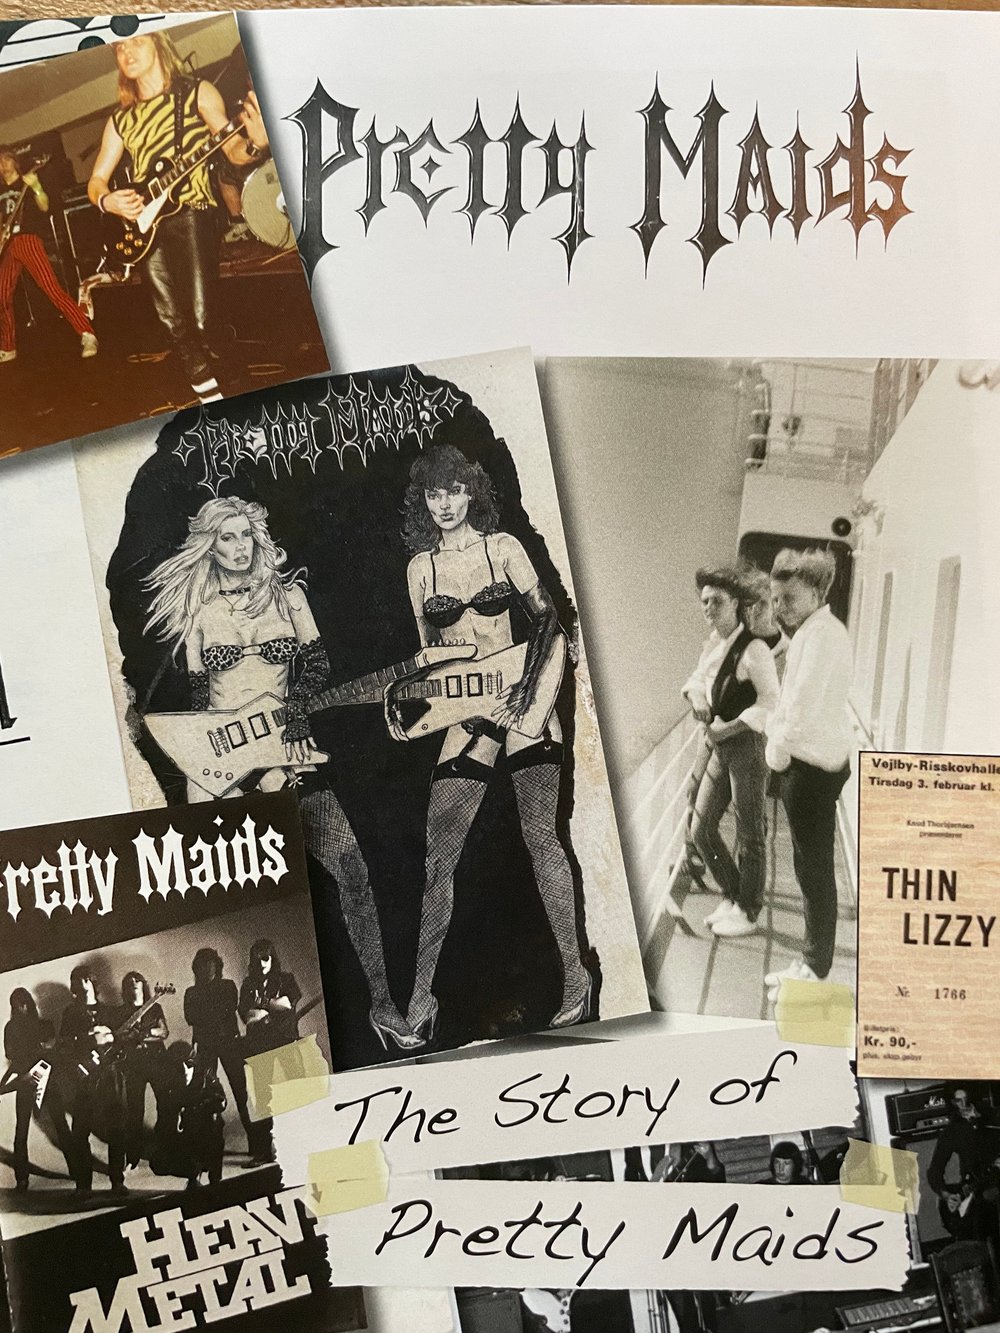 We Came To Rock - The Pretty Maids Journals